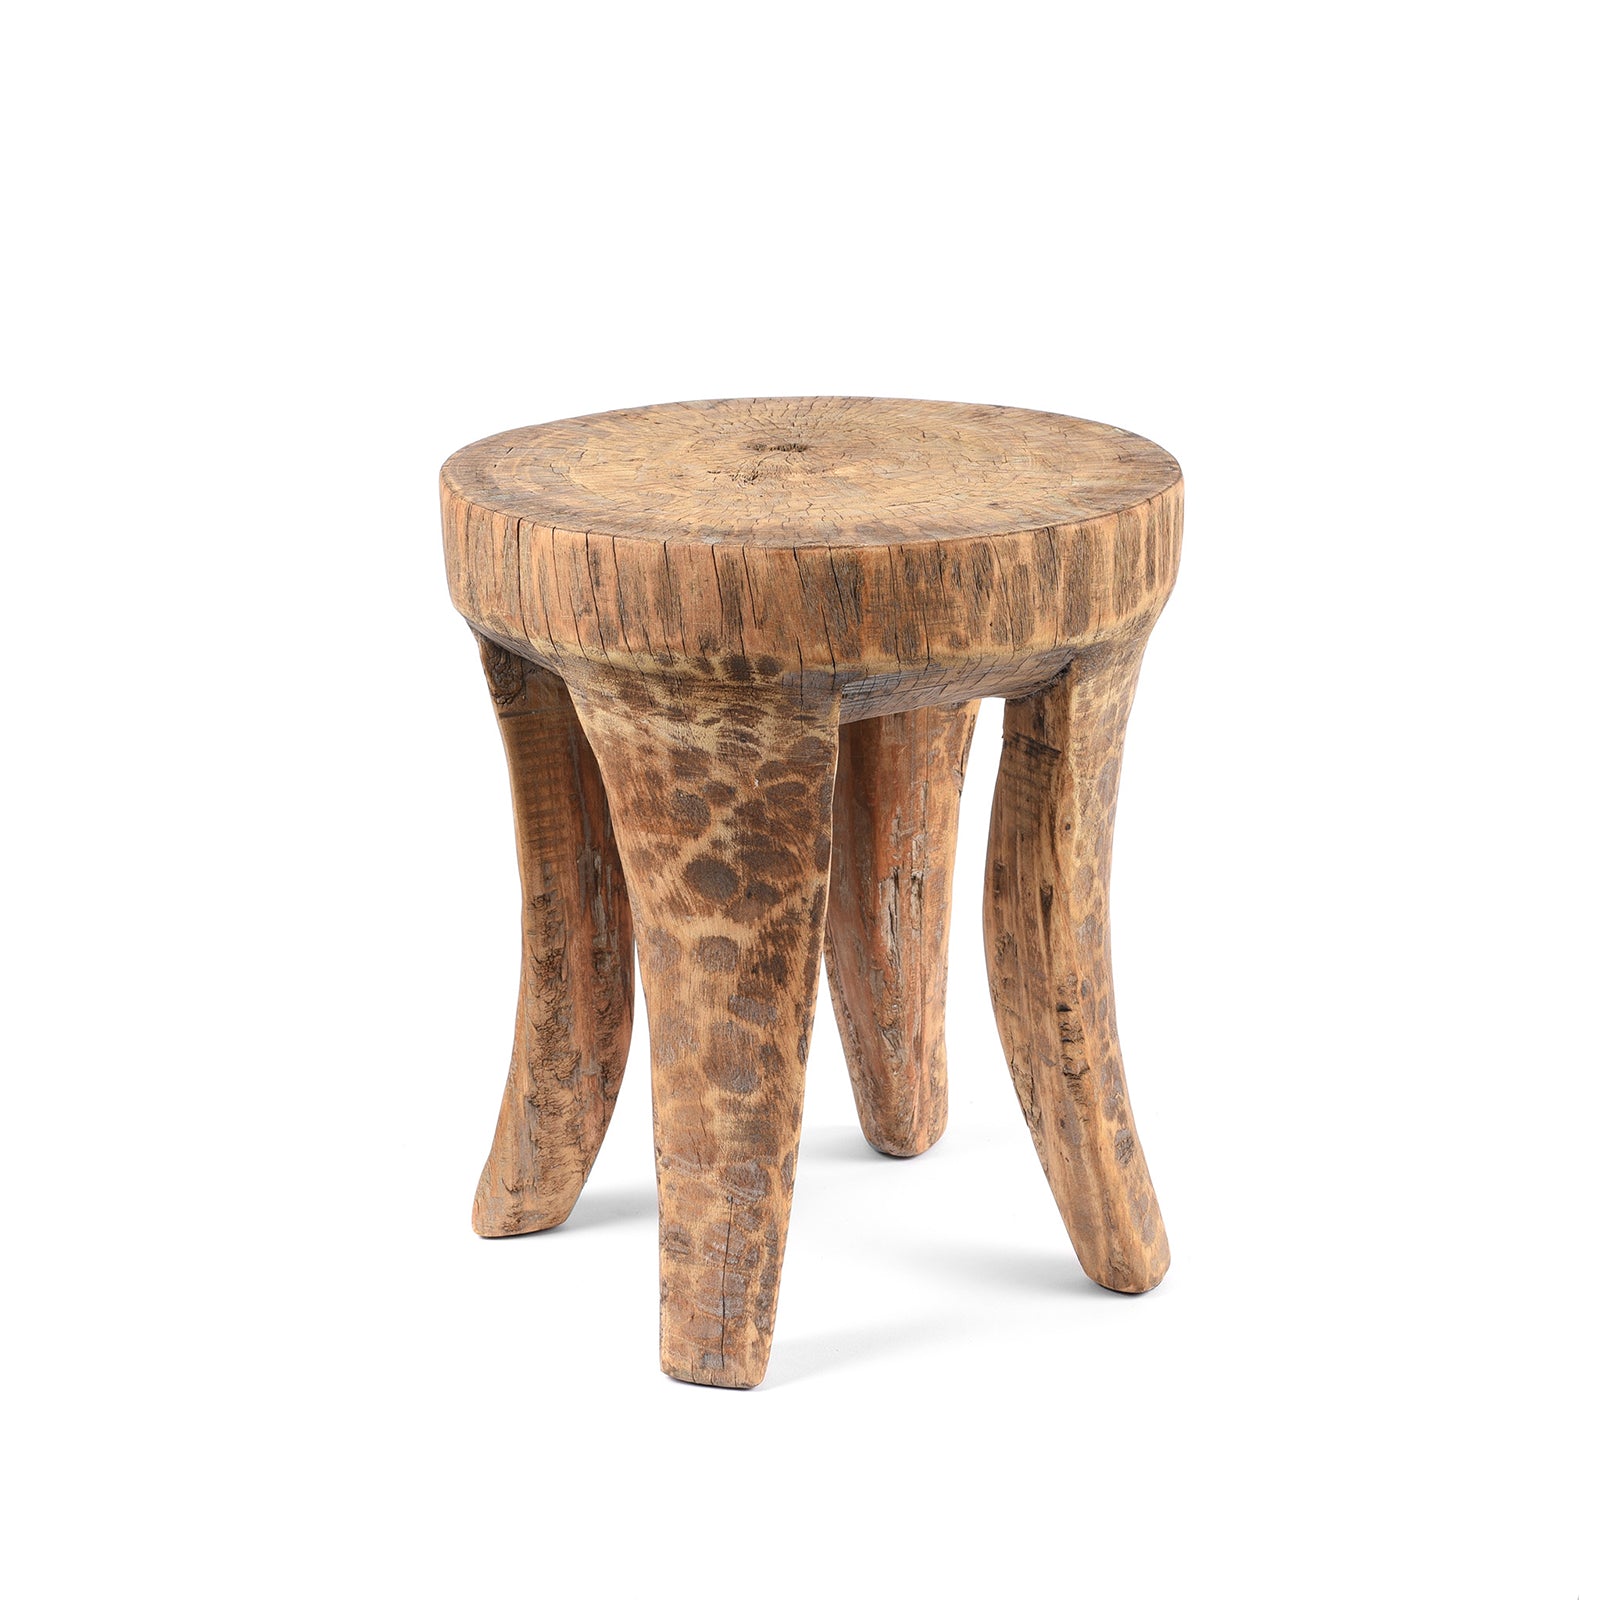 Vintage Neem Wood Stool From Himachal - Circa 60 Yrs Old | Indigo Antiques